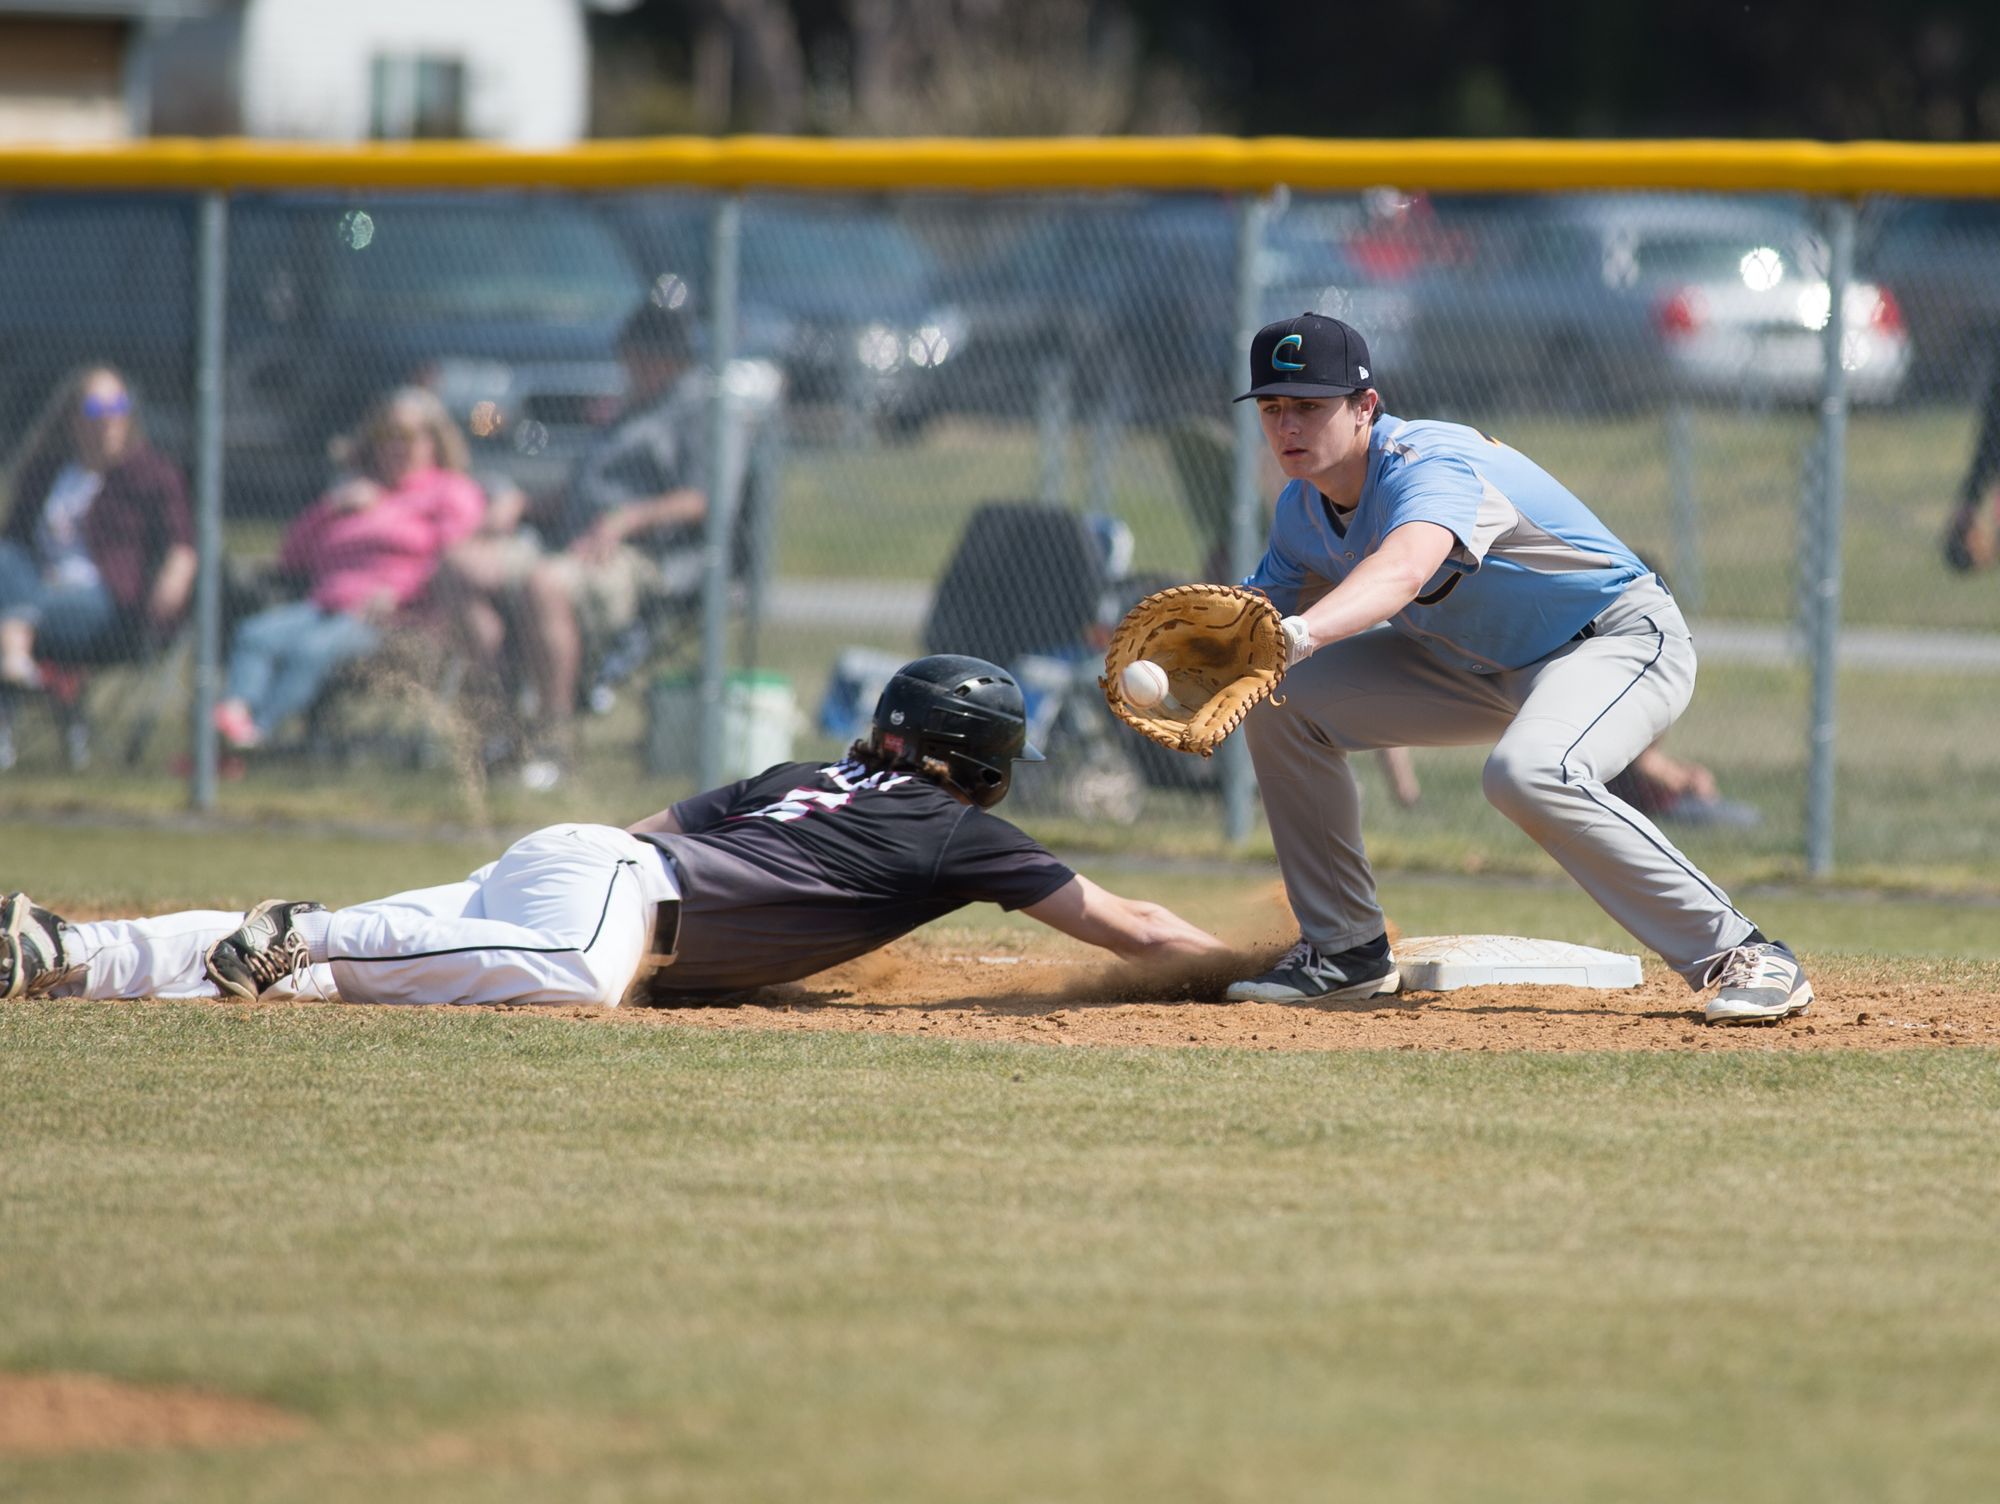 Cape Henlopen’s Connor Thompson (12) tries to tag out Caravel’s Joey Silan (6) at first base in their first inning of play.